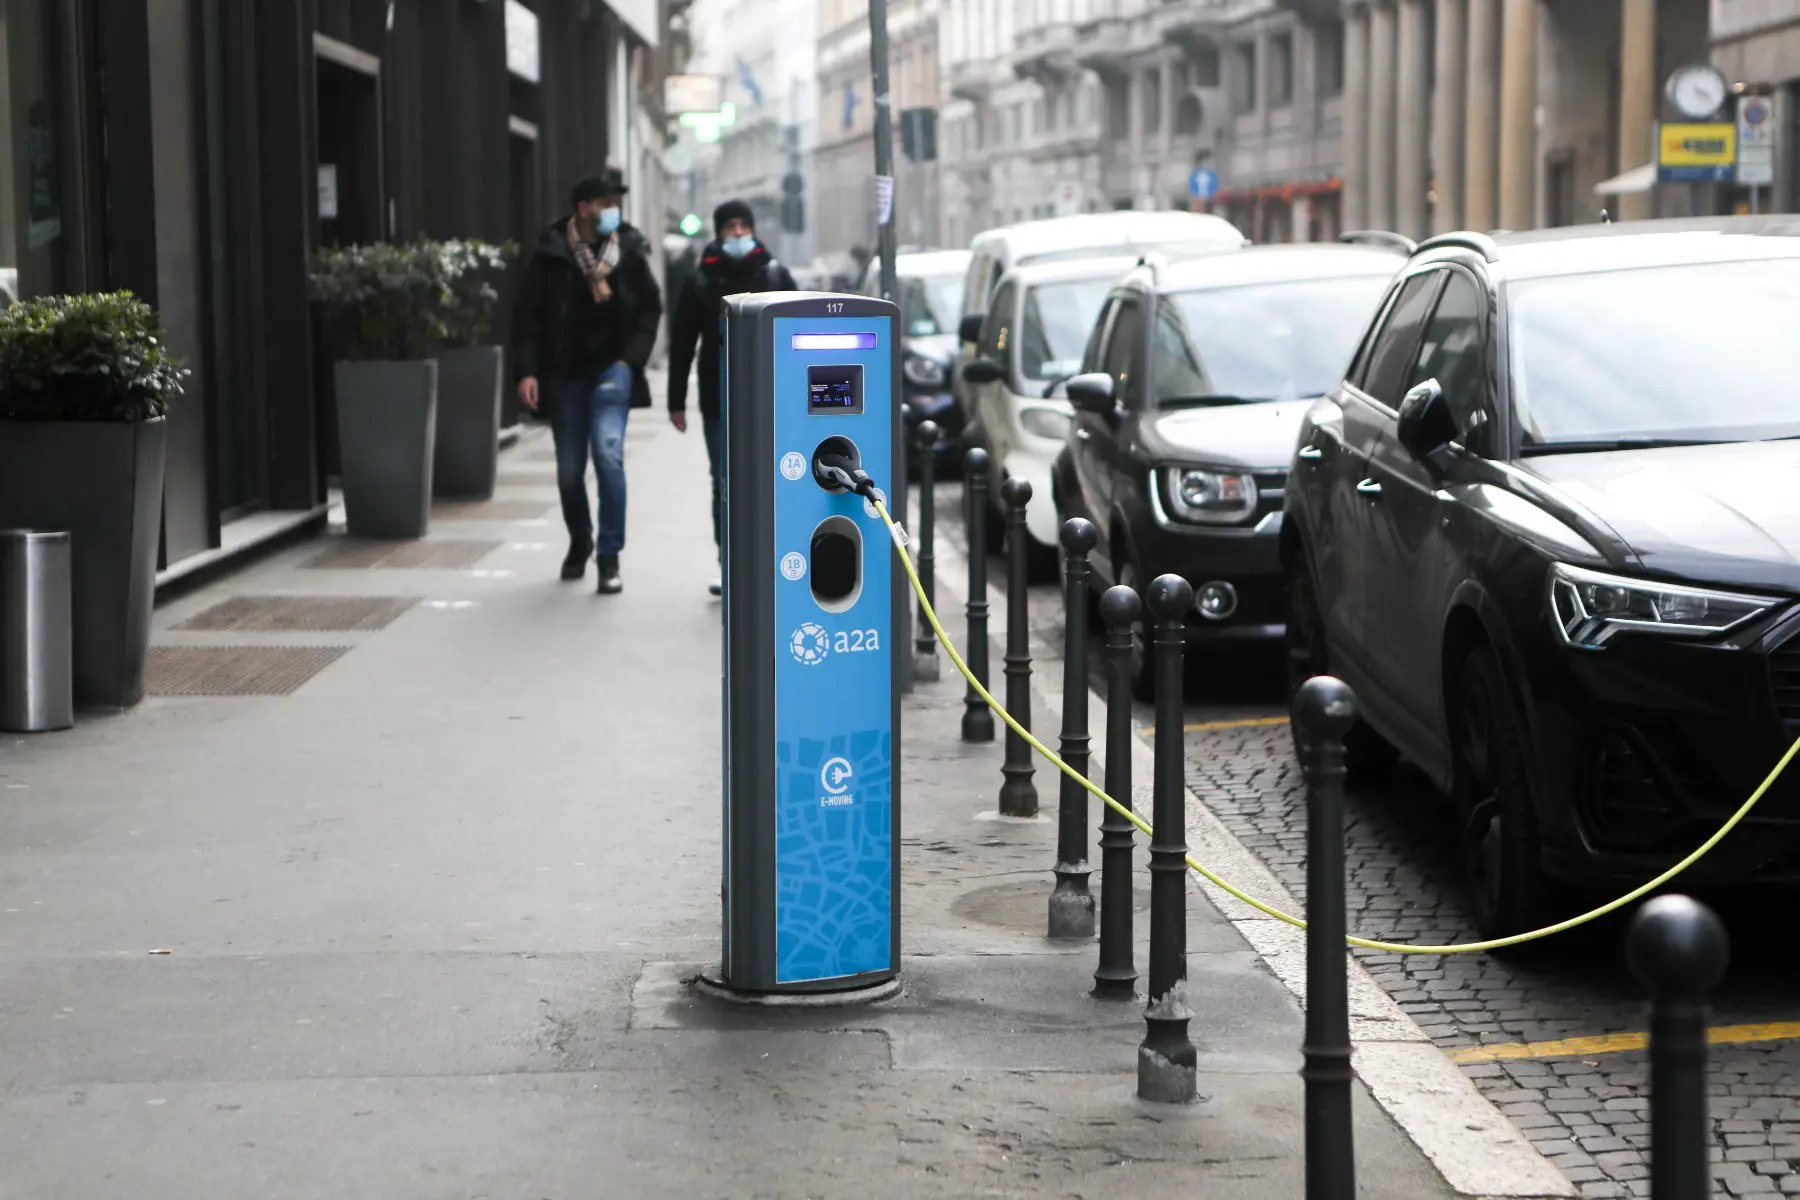 A charging station for electric cars in Milan, Italy